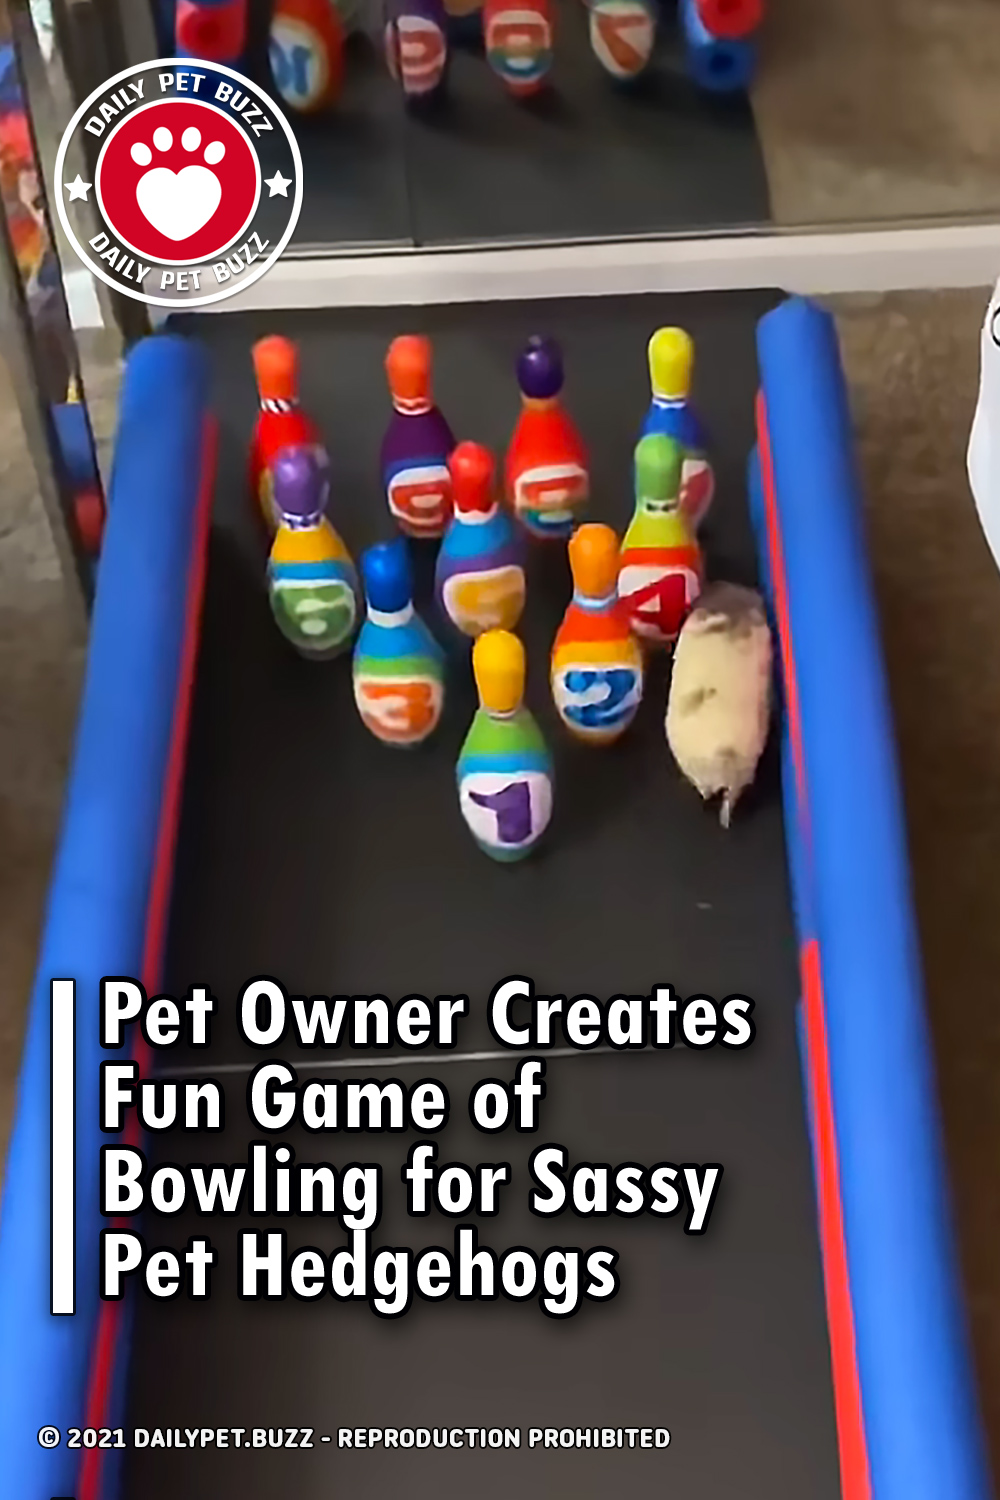 Pet Owner Creates Fun Game of Bowling for Sassy Pet Hedgehogs